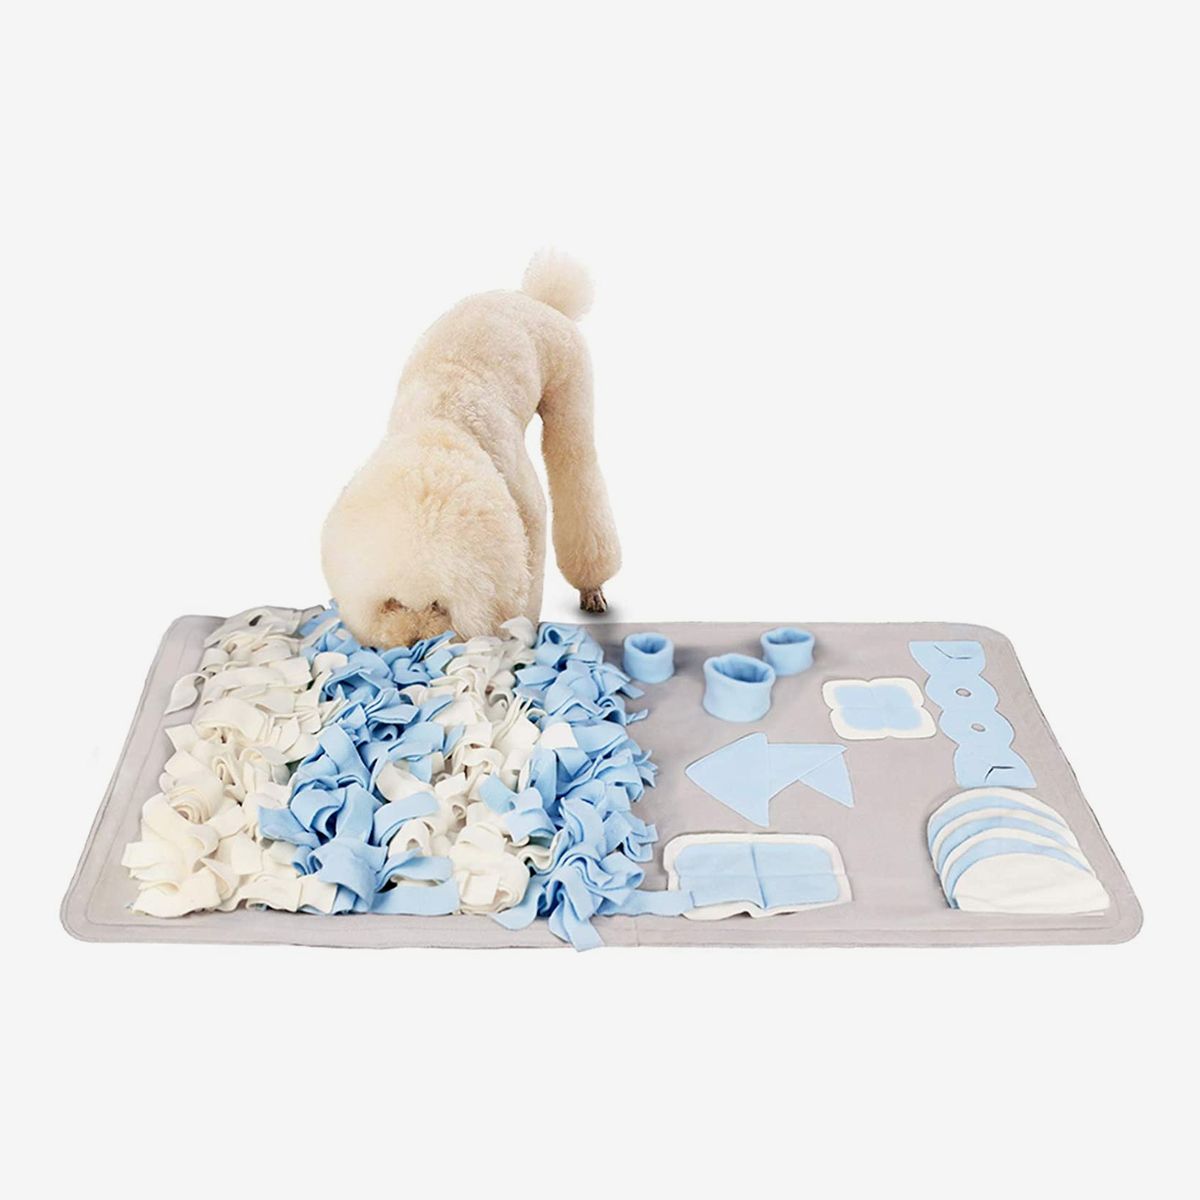 C N//U Pet Snuffle Mat Flower Shape Feeding Mats for Dogs Training Slow Feeding Mat,Dog Sniff Carpet Interactive Toys for Pet Cats Dogs Stress Release